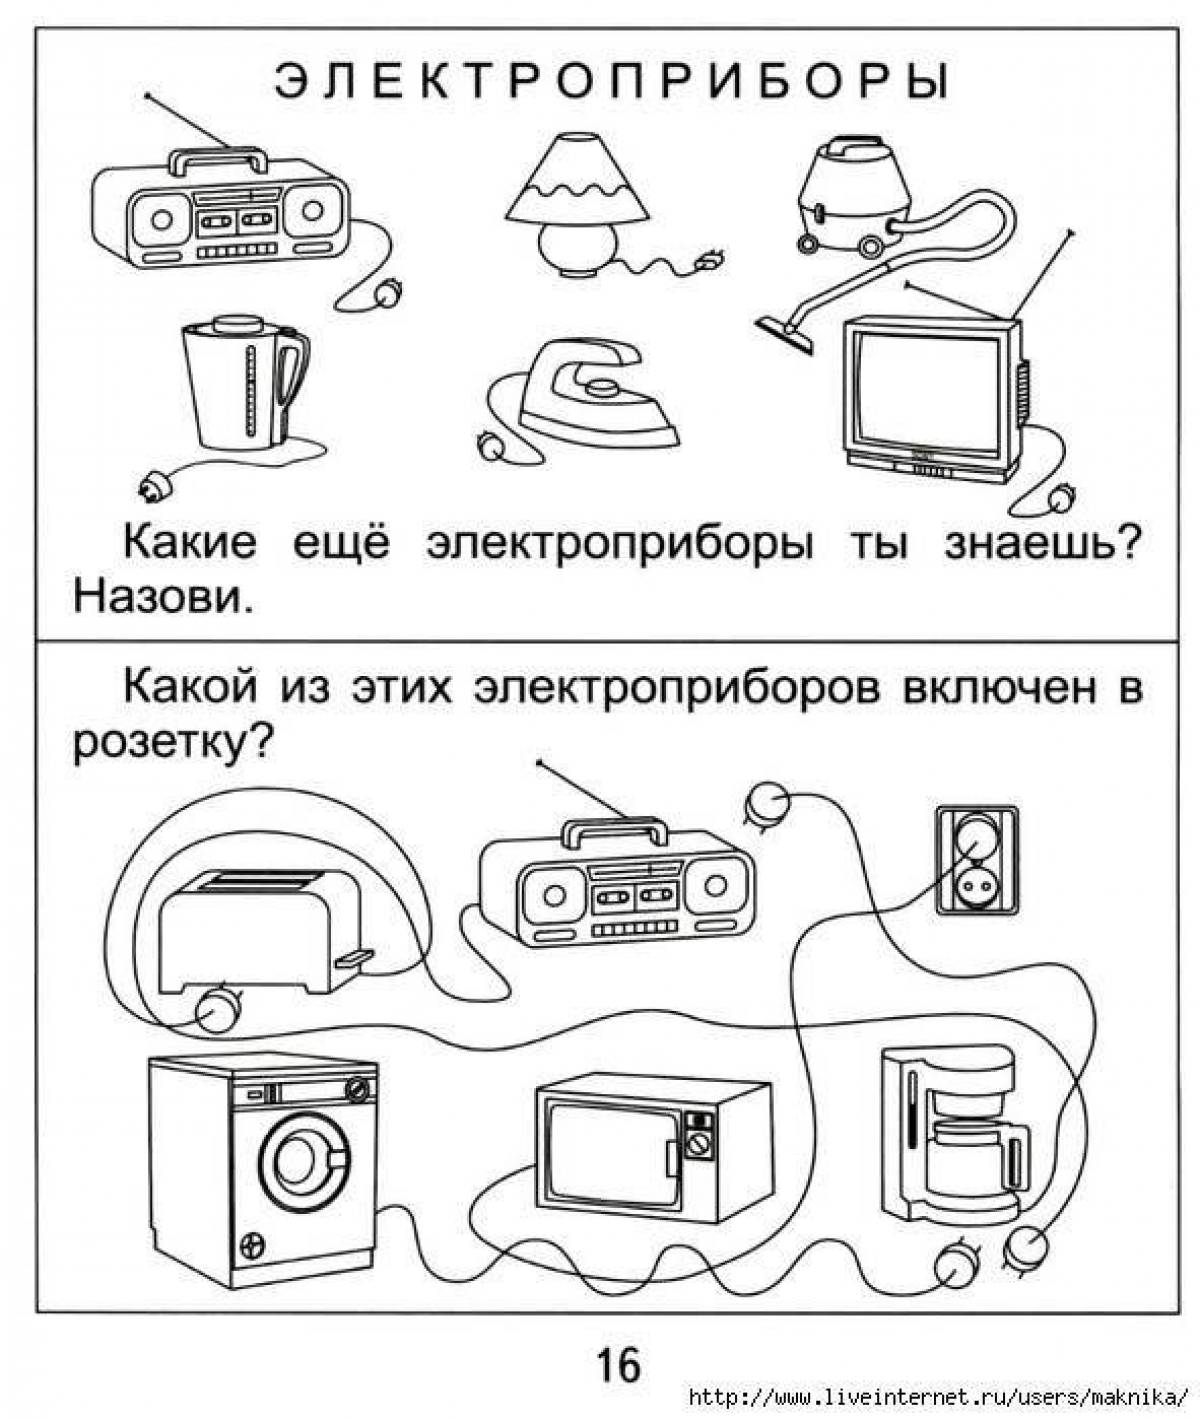 Adorable electrical appliances coloring page